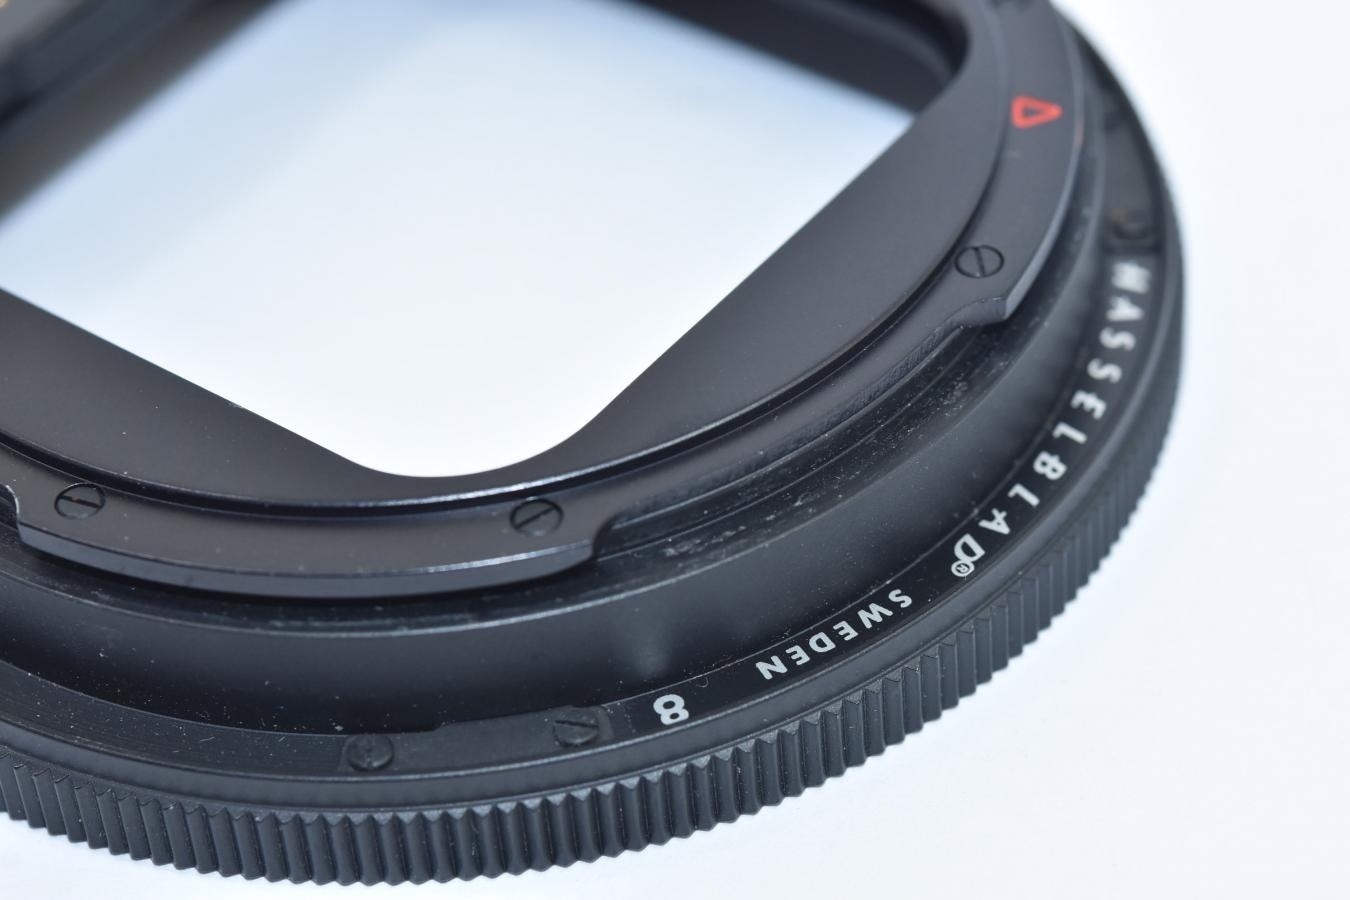 HASSELBLAD EXTENSION TUBE 8